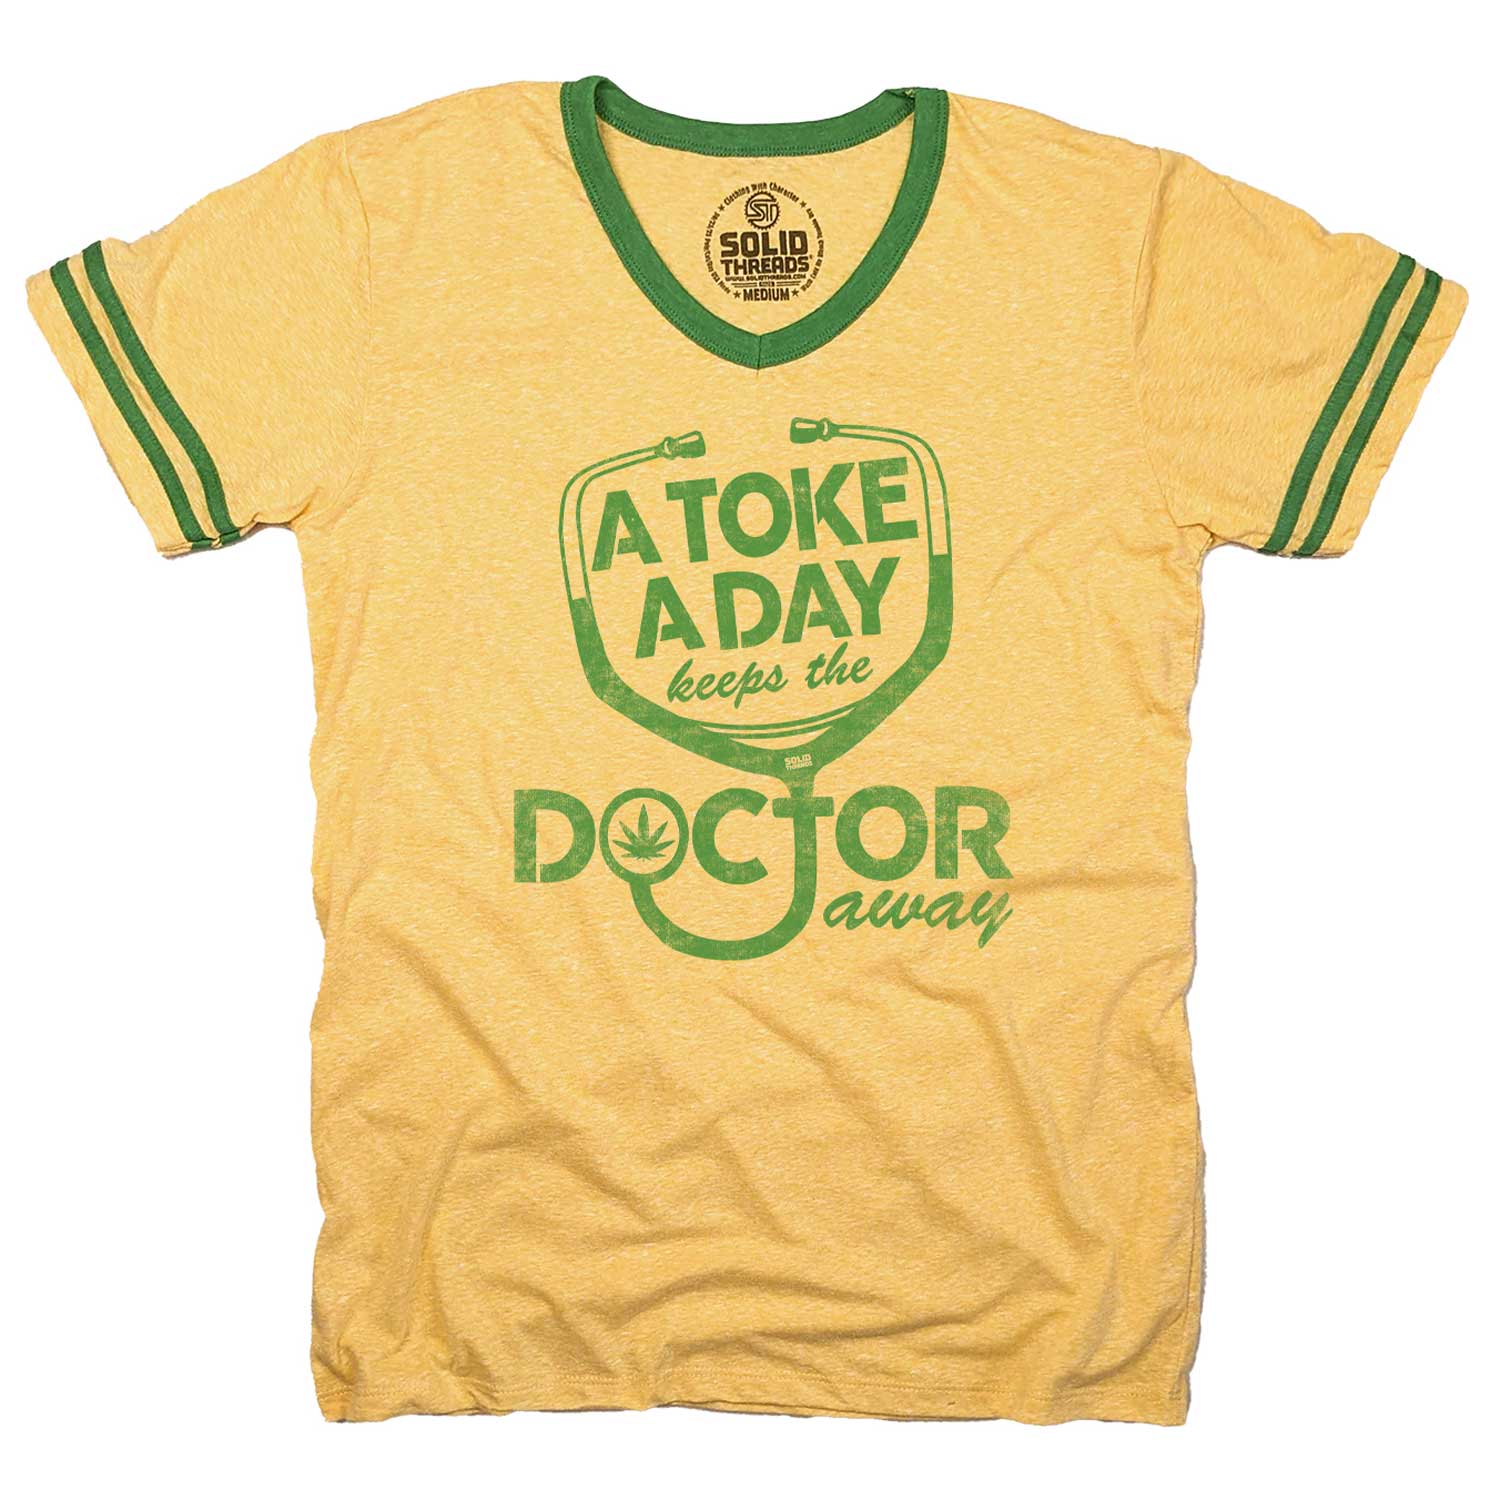 Men's A Toke A Day Keeps The Doctor Away Funny Graphic V-Neck Tee | Stoner T-Shirt | Solid Threads